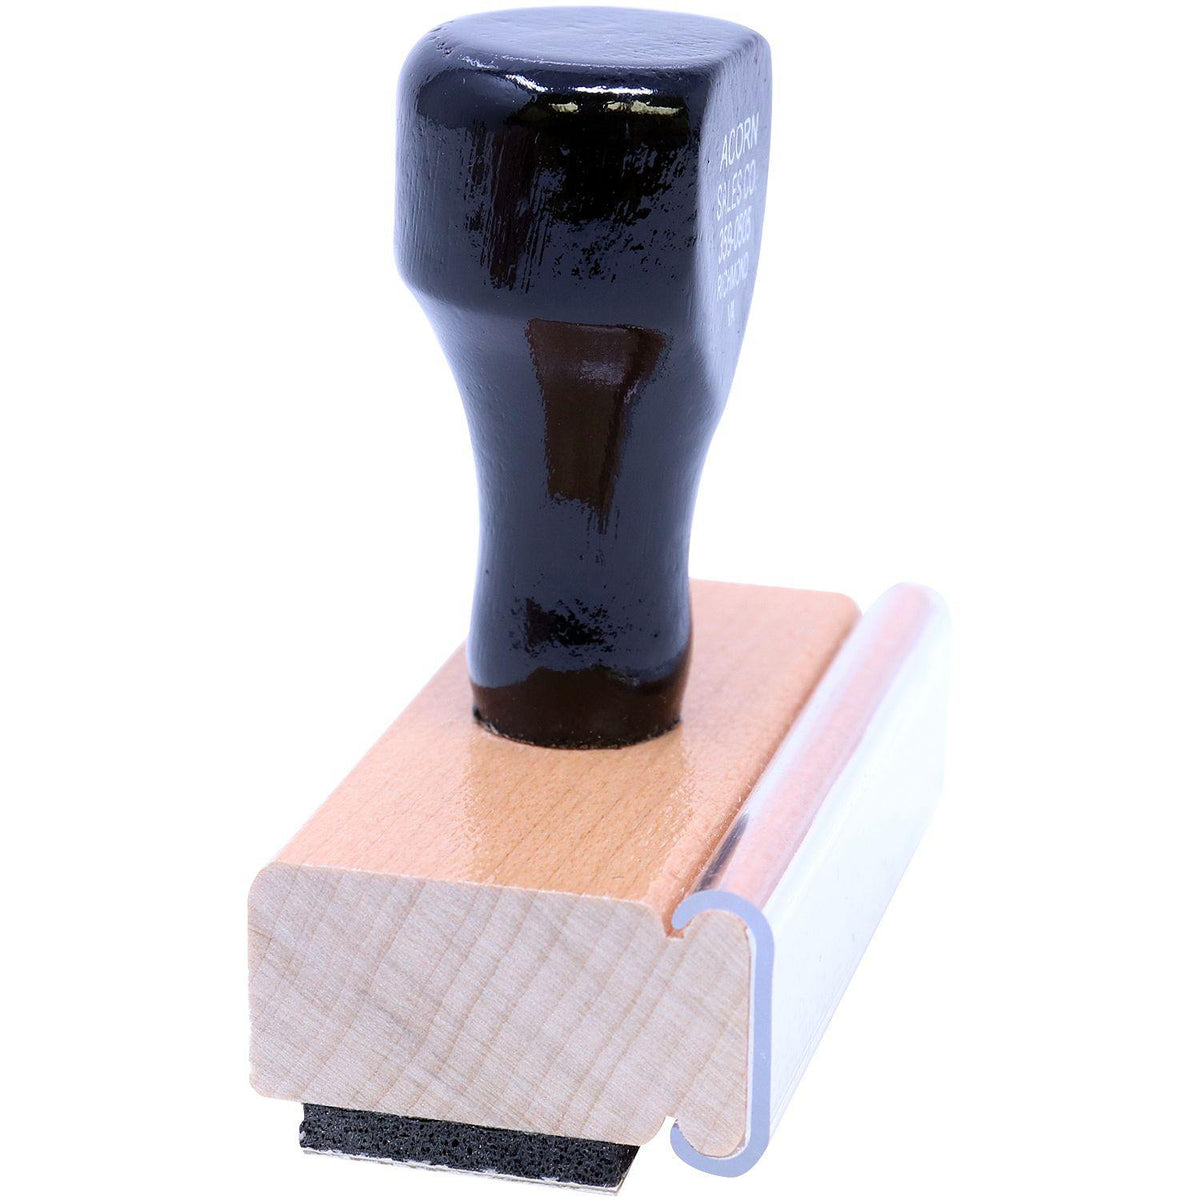 Outline Personal Rubber Stamp - Engineer Seal Stamps - Brand_Acorn, Impression Size_Small, Stamp Type_Regular Stamp, Type of Use_Business, Type of Use_General, Type of Use_Office